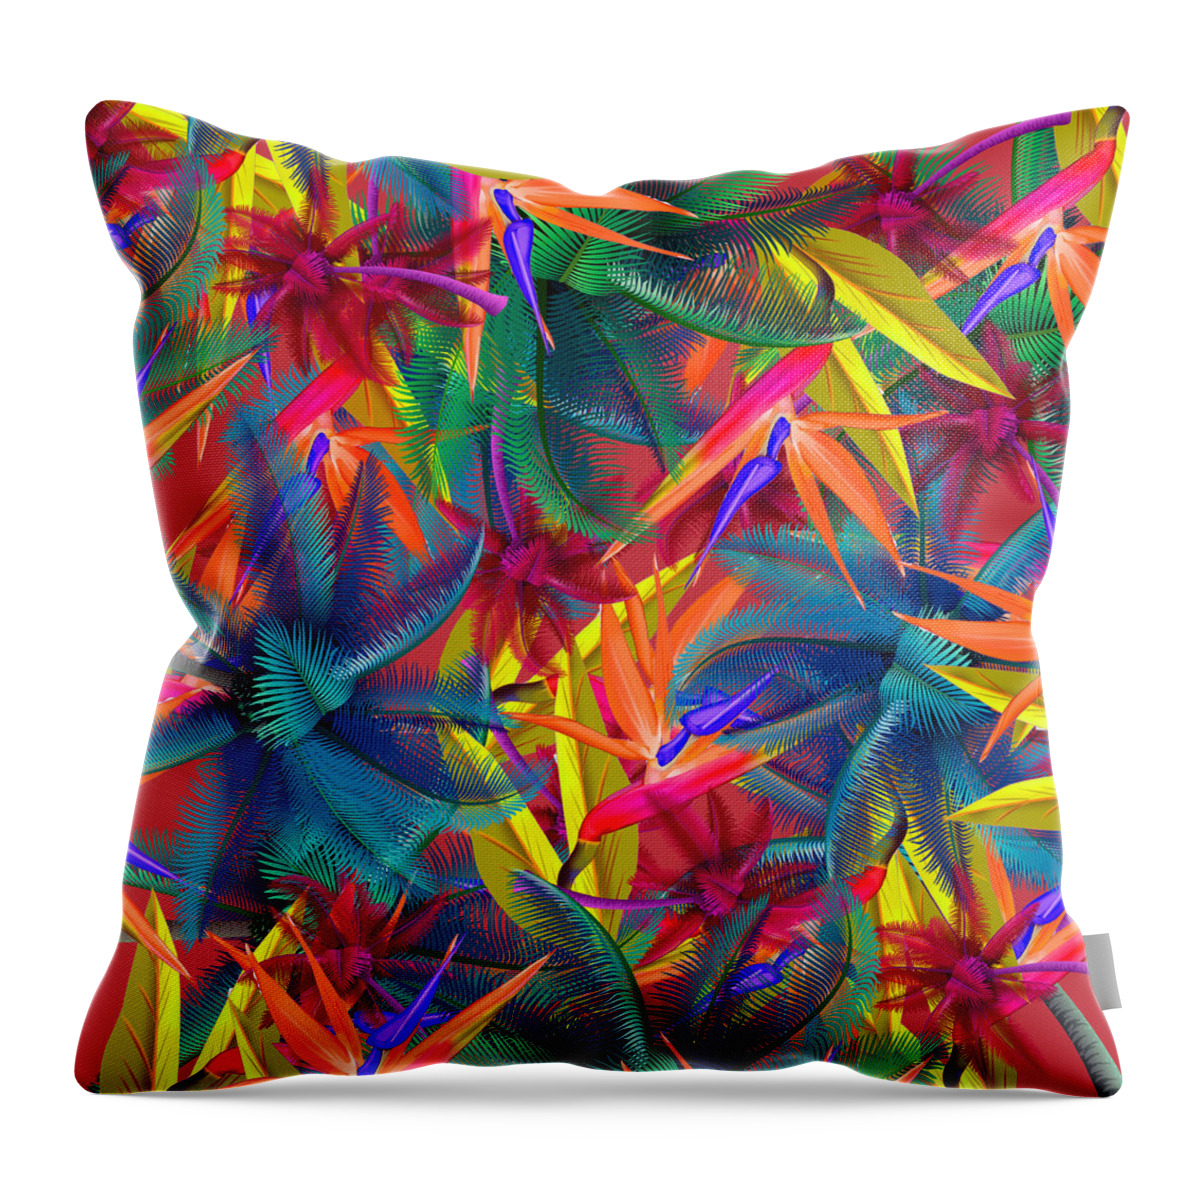 Cherry Throw Pillow featuring the painting Tropical 7 by Mark Ashkenazi